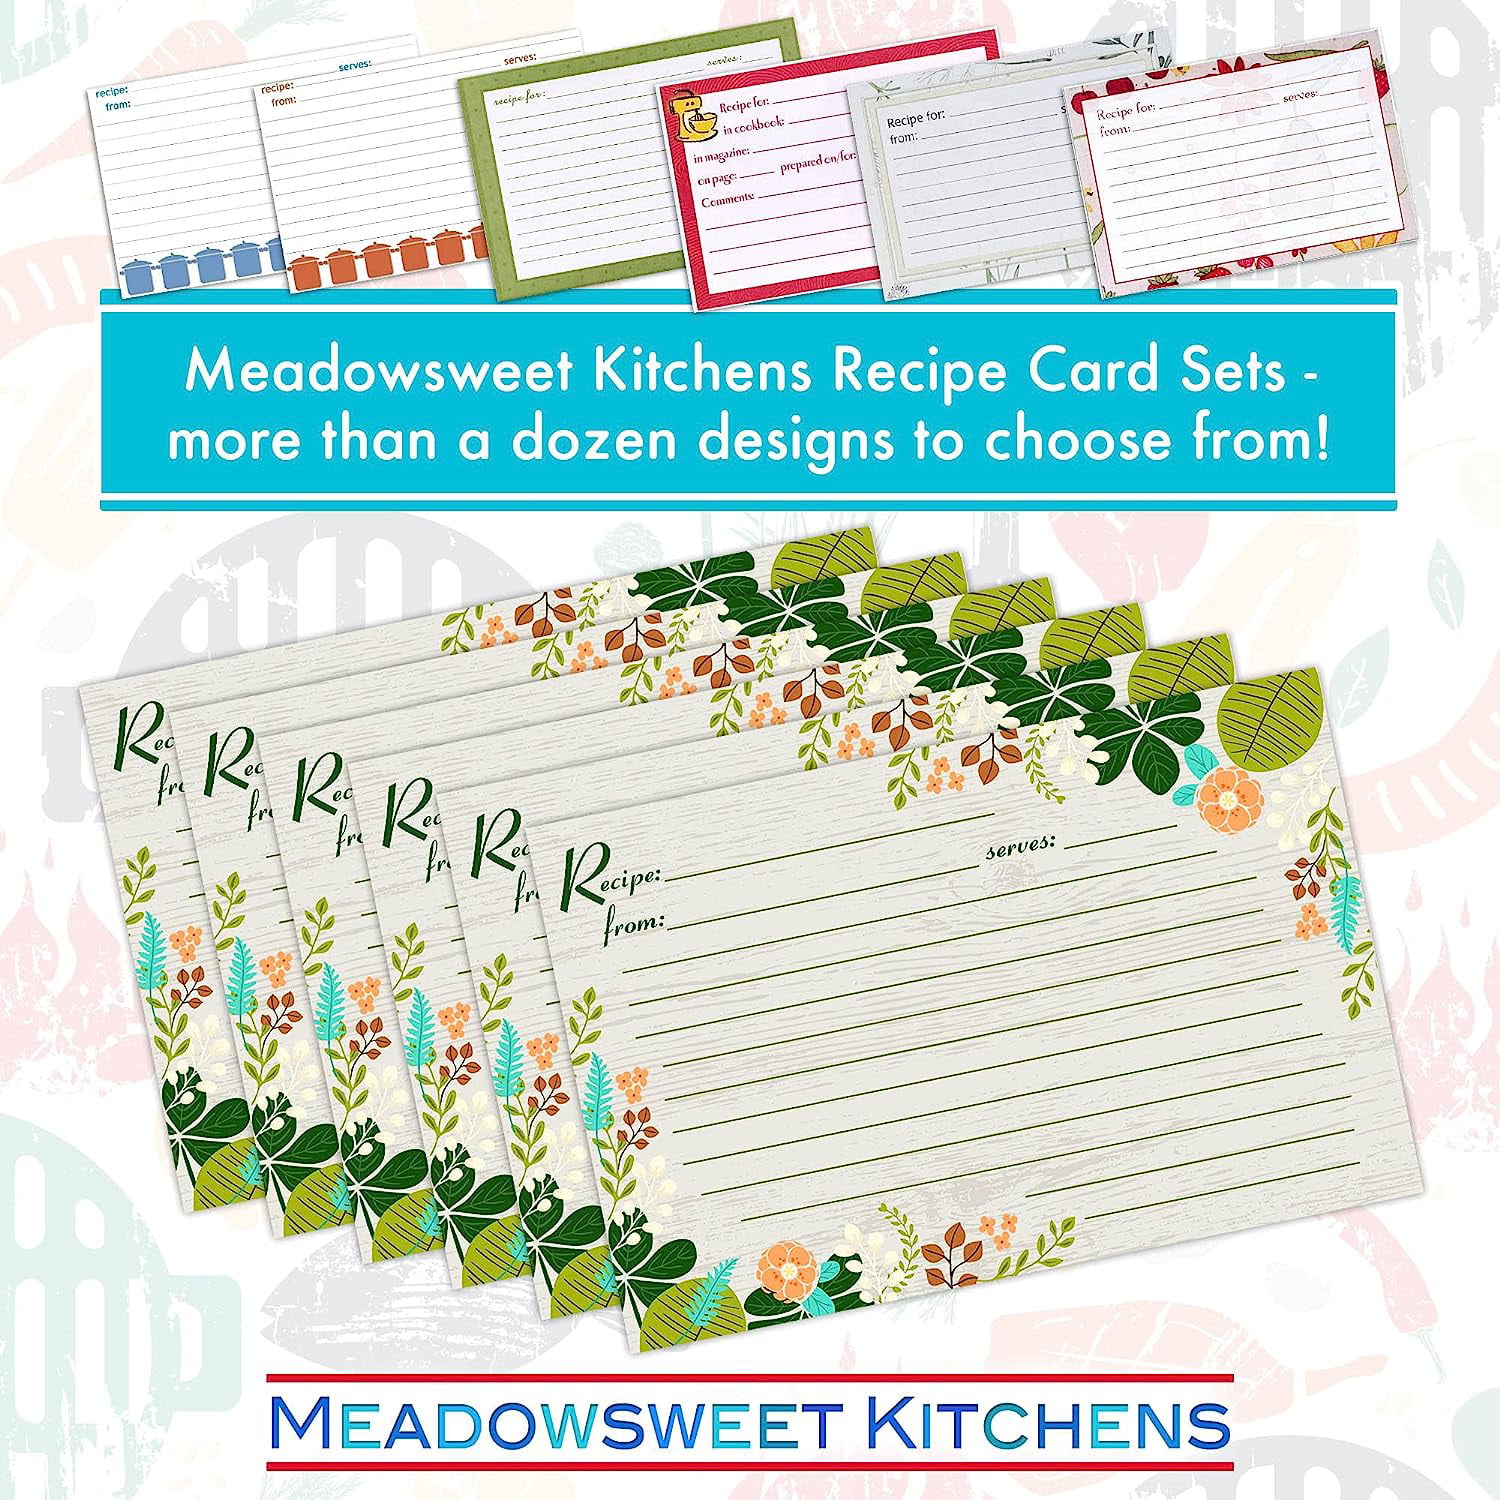 200+ Recipe Cards to Buy: Sort by Reviews/Color/Size/Popularity